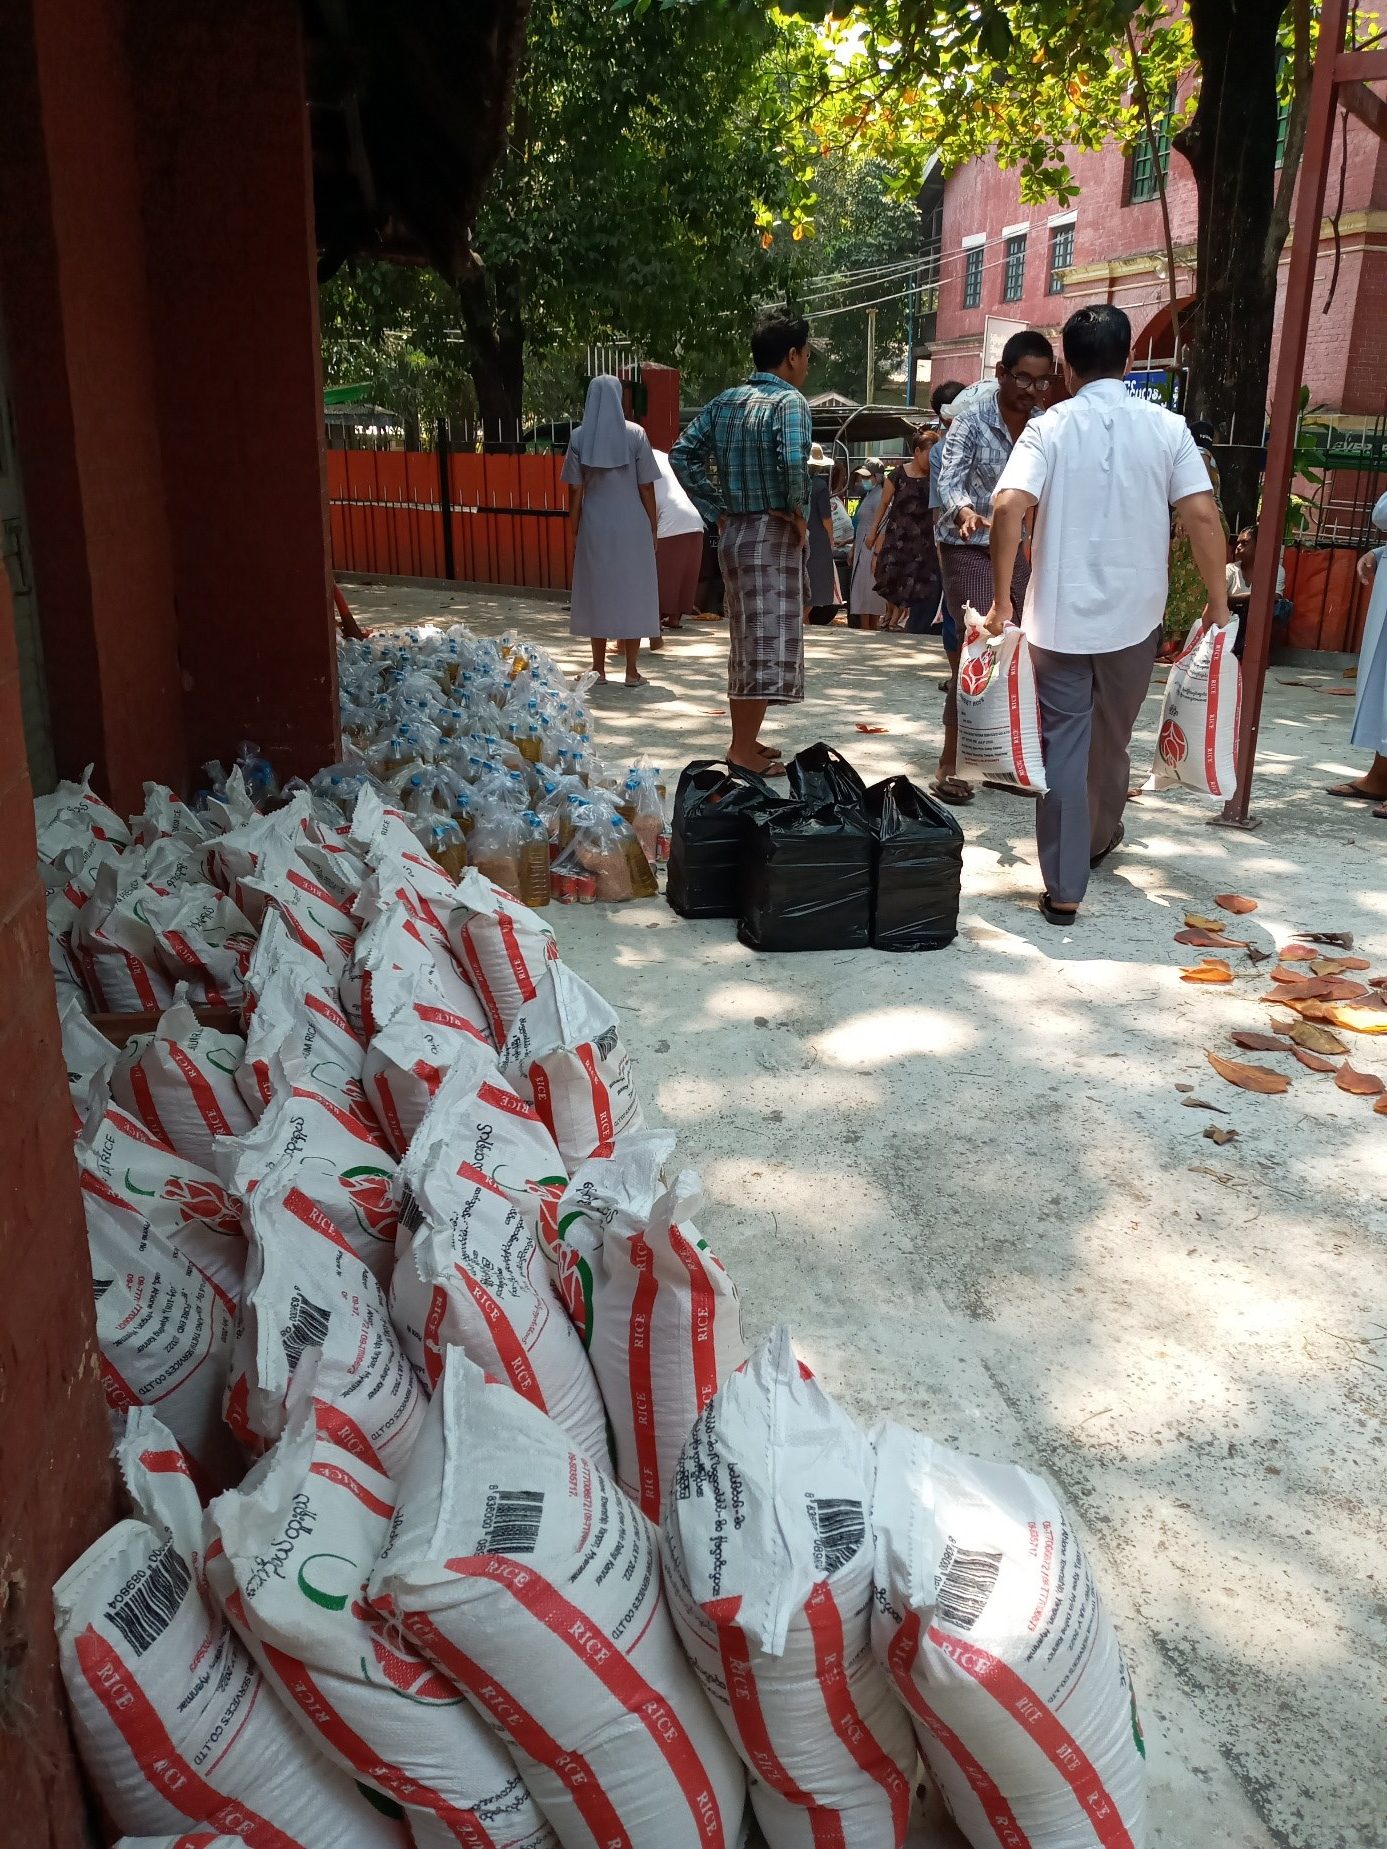 A distribution of food supply in Myanmar (Burma)